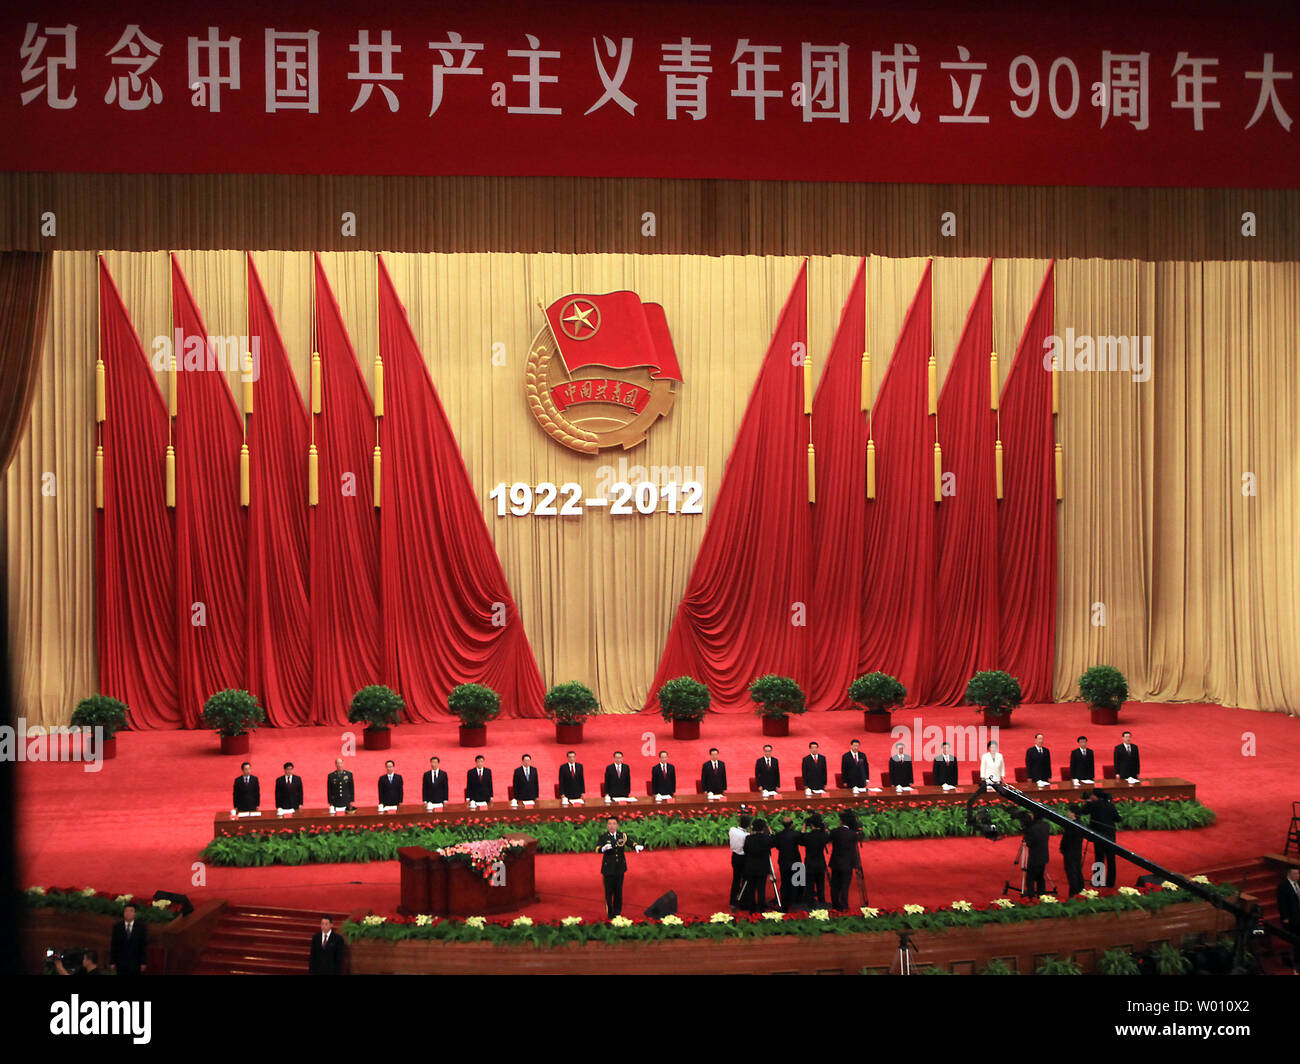 The leaders of the Communist Party of China attend the 'Celebration of the 90th Anniversary of the Communist Youth League of China' being held in the Great Hall of the People in Beijing on May 4, 2012.  Recent events involving human rights and corruption have cast some doubt on the Chinese Communist Party's continued ability to maintain a firm grip on the state apparatus and Chinese society, according to both academics and analysts working in China.   UPI/Stephen Shaver Stock Photo